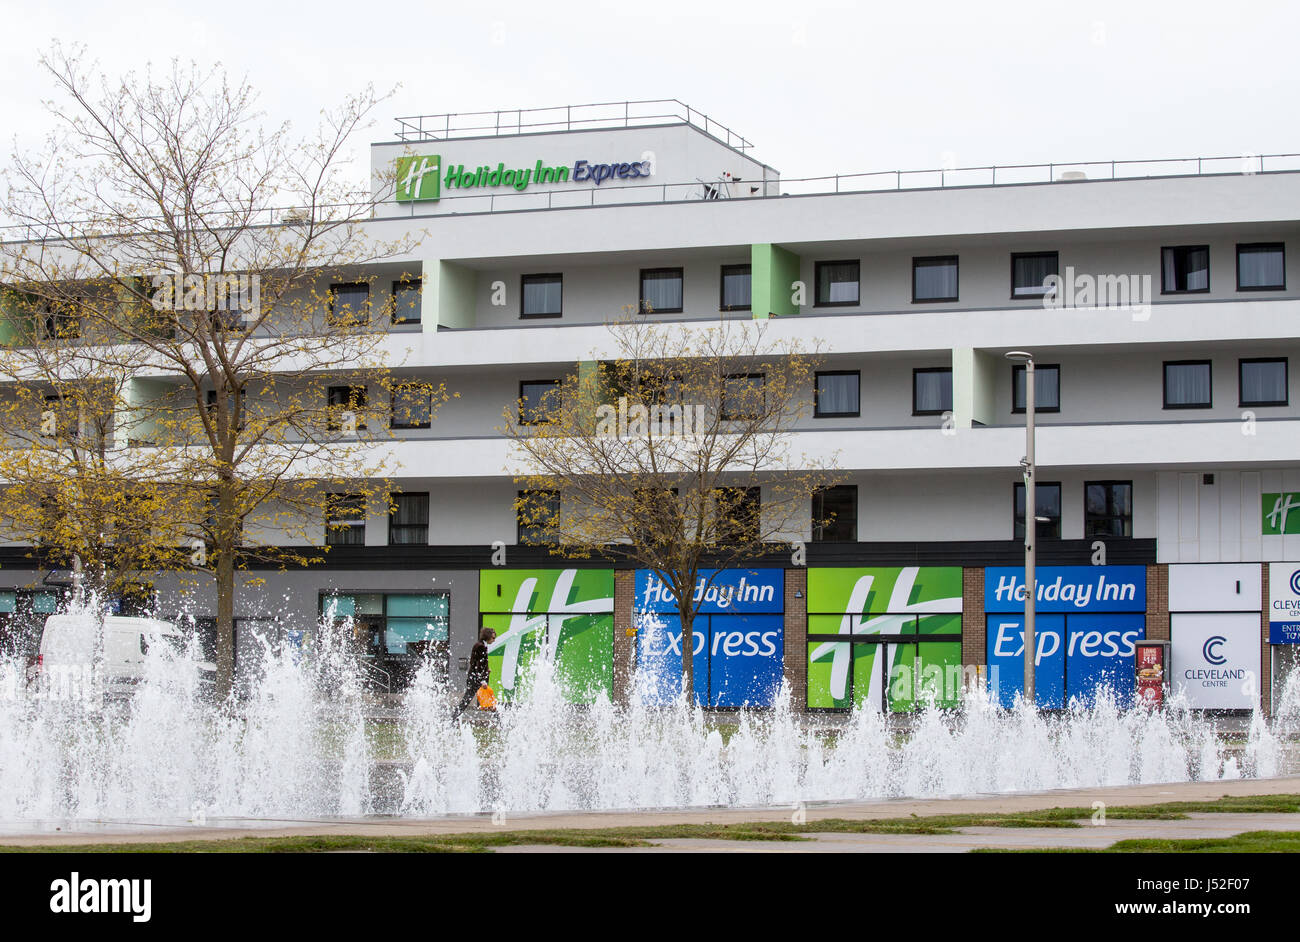 Holiday Inn Express Hotel in Middlesbrough Foto Stock